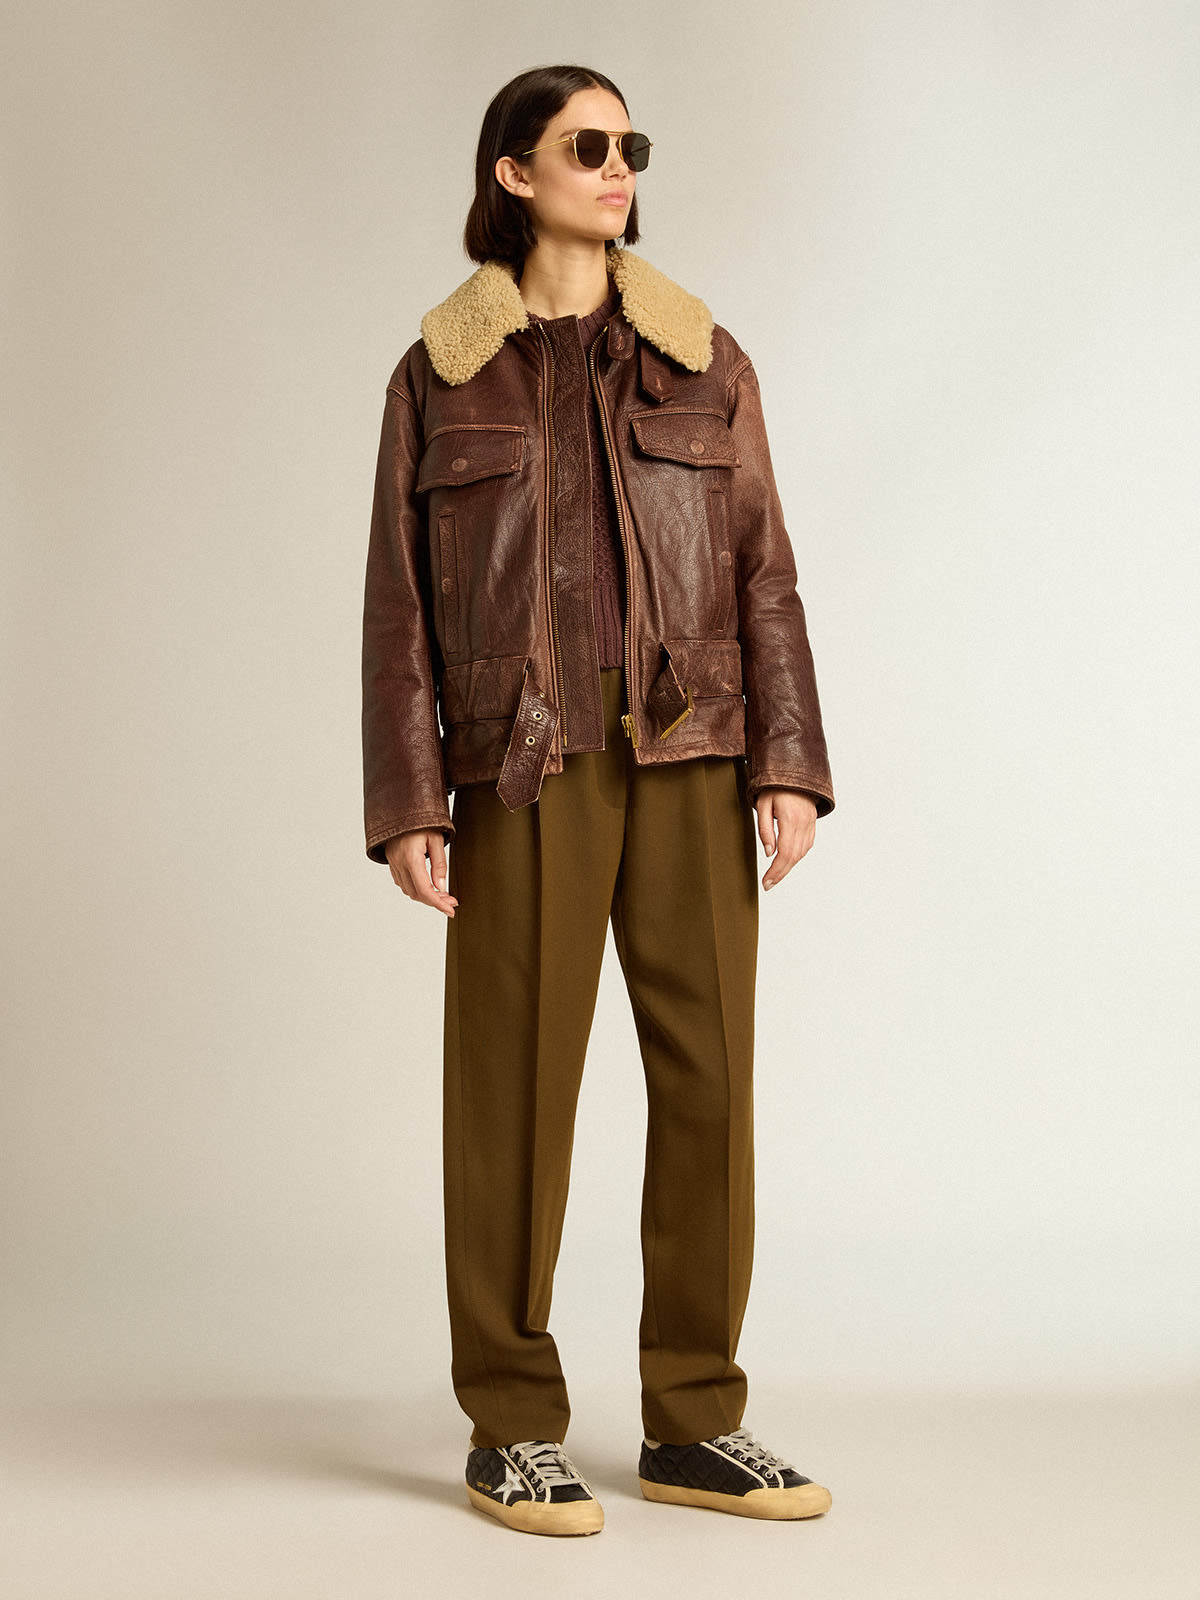 Golden Goose - Beech-colored pants in wool and viscose blend in 